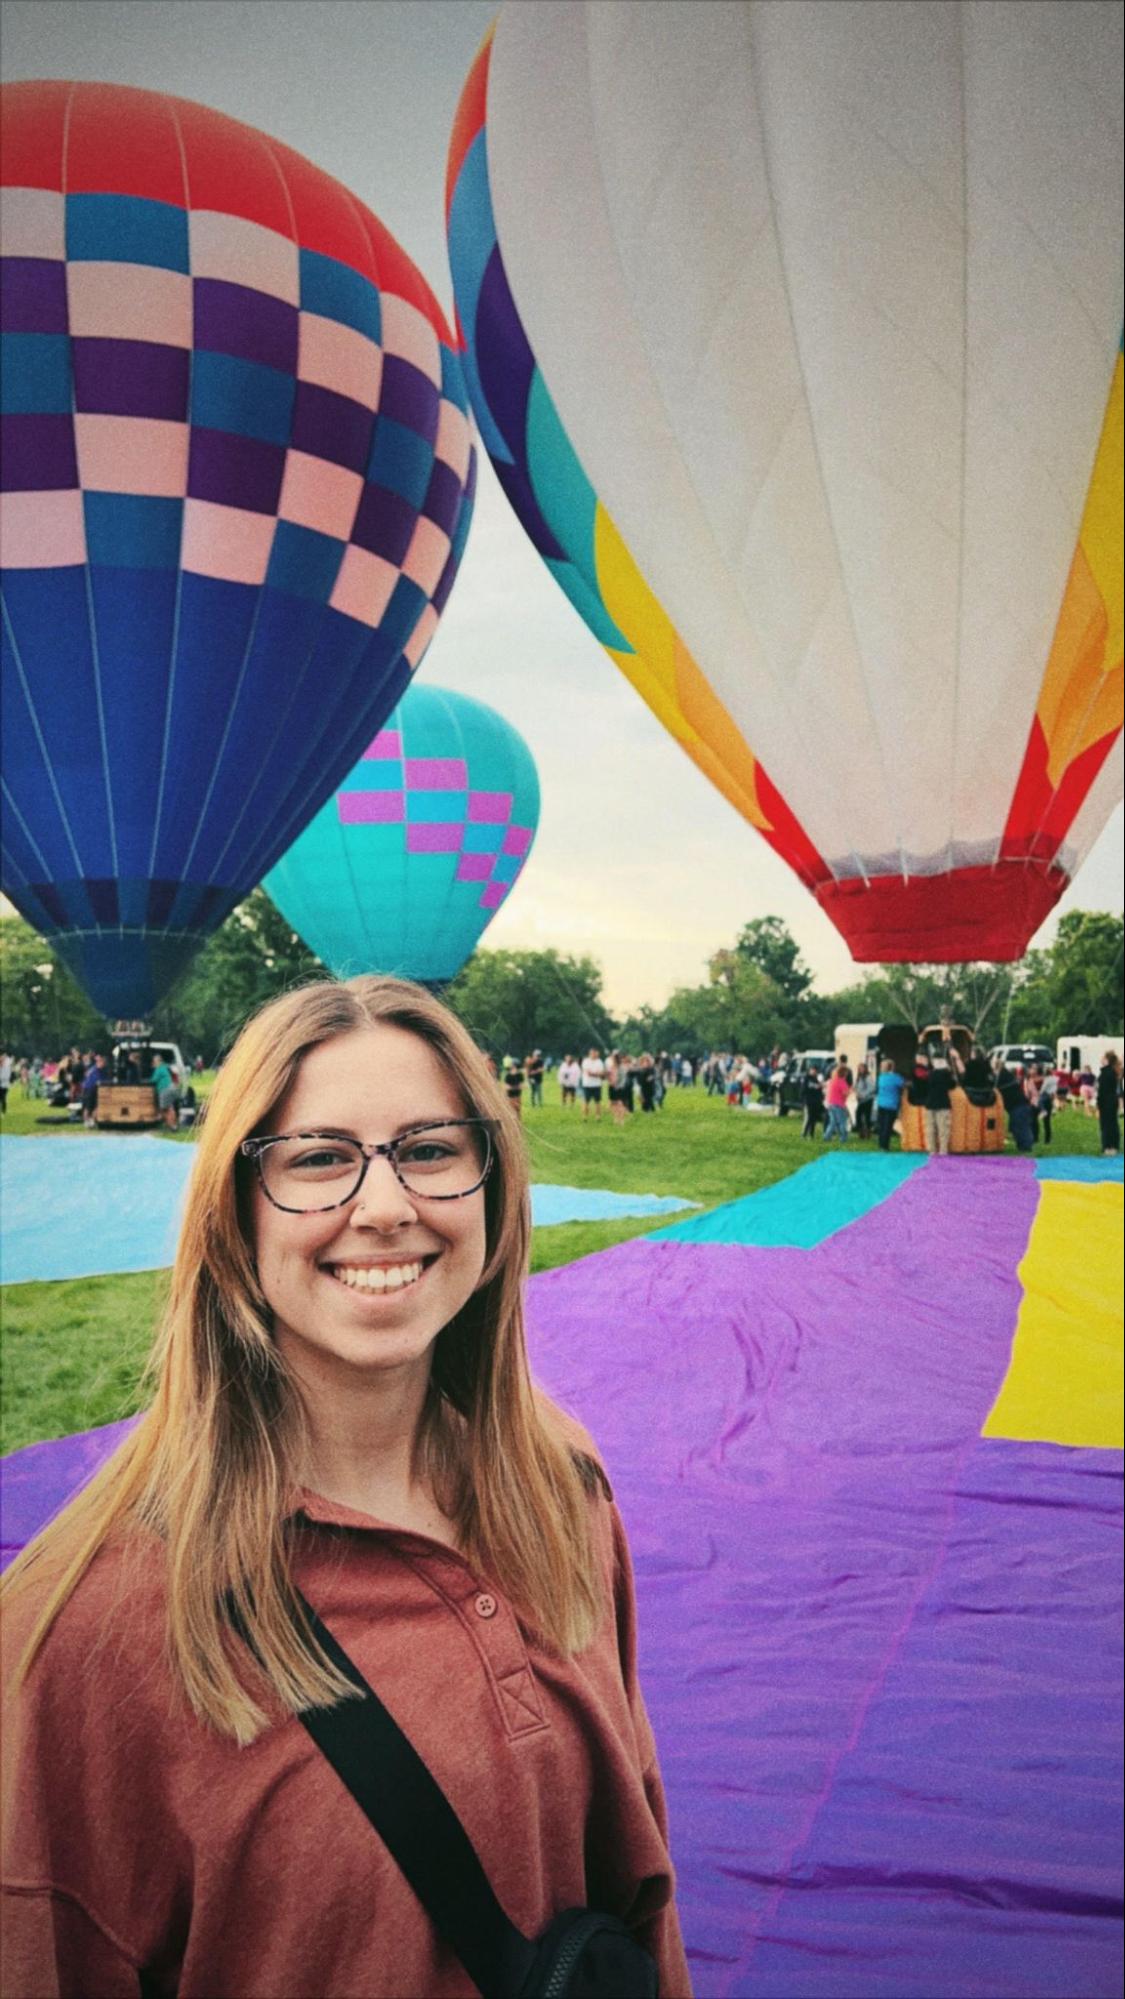 Maddie Mesher in front of hot air balloons